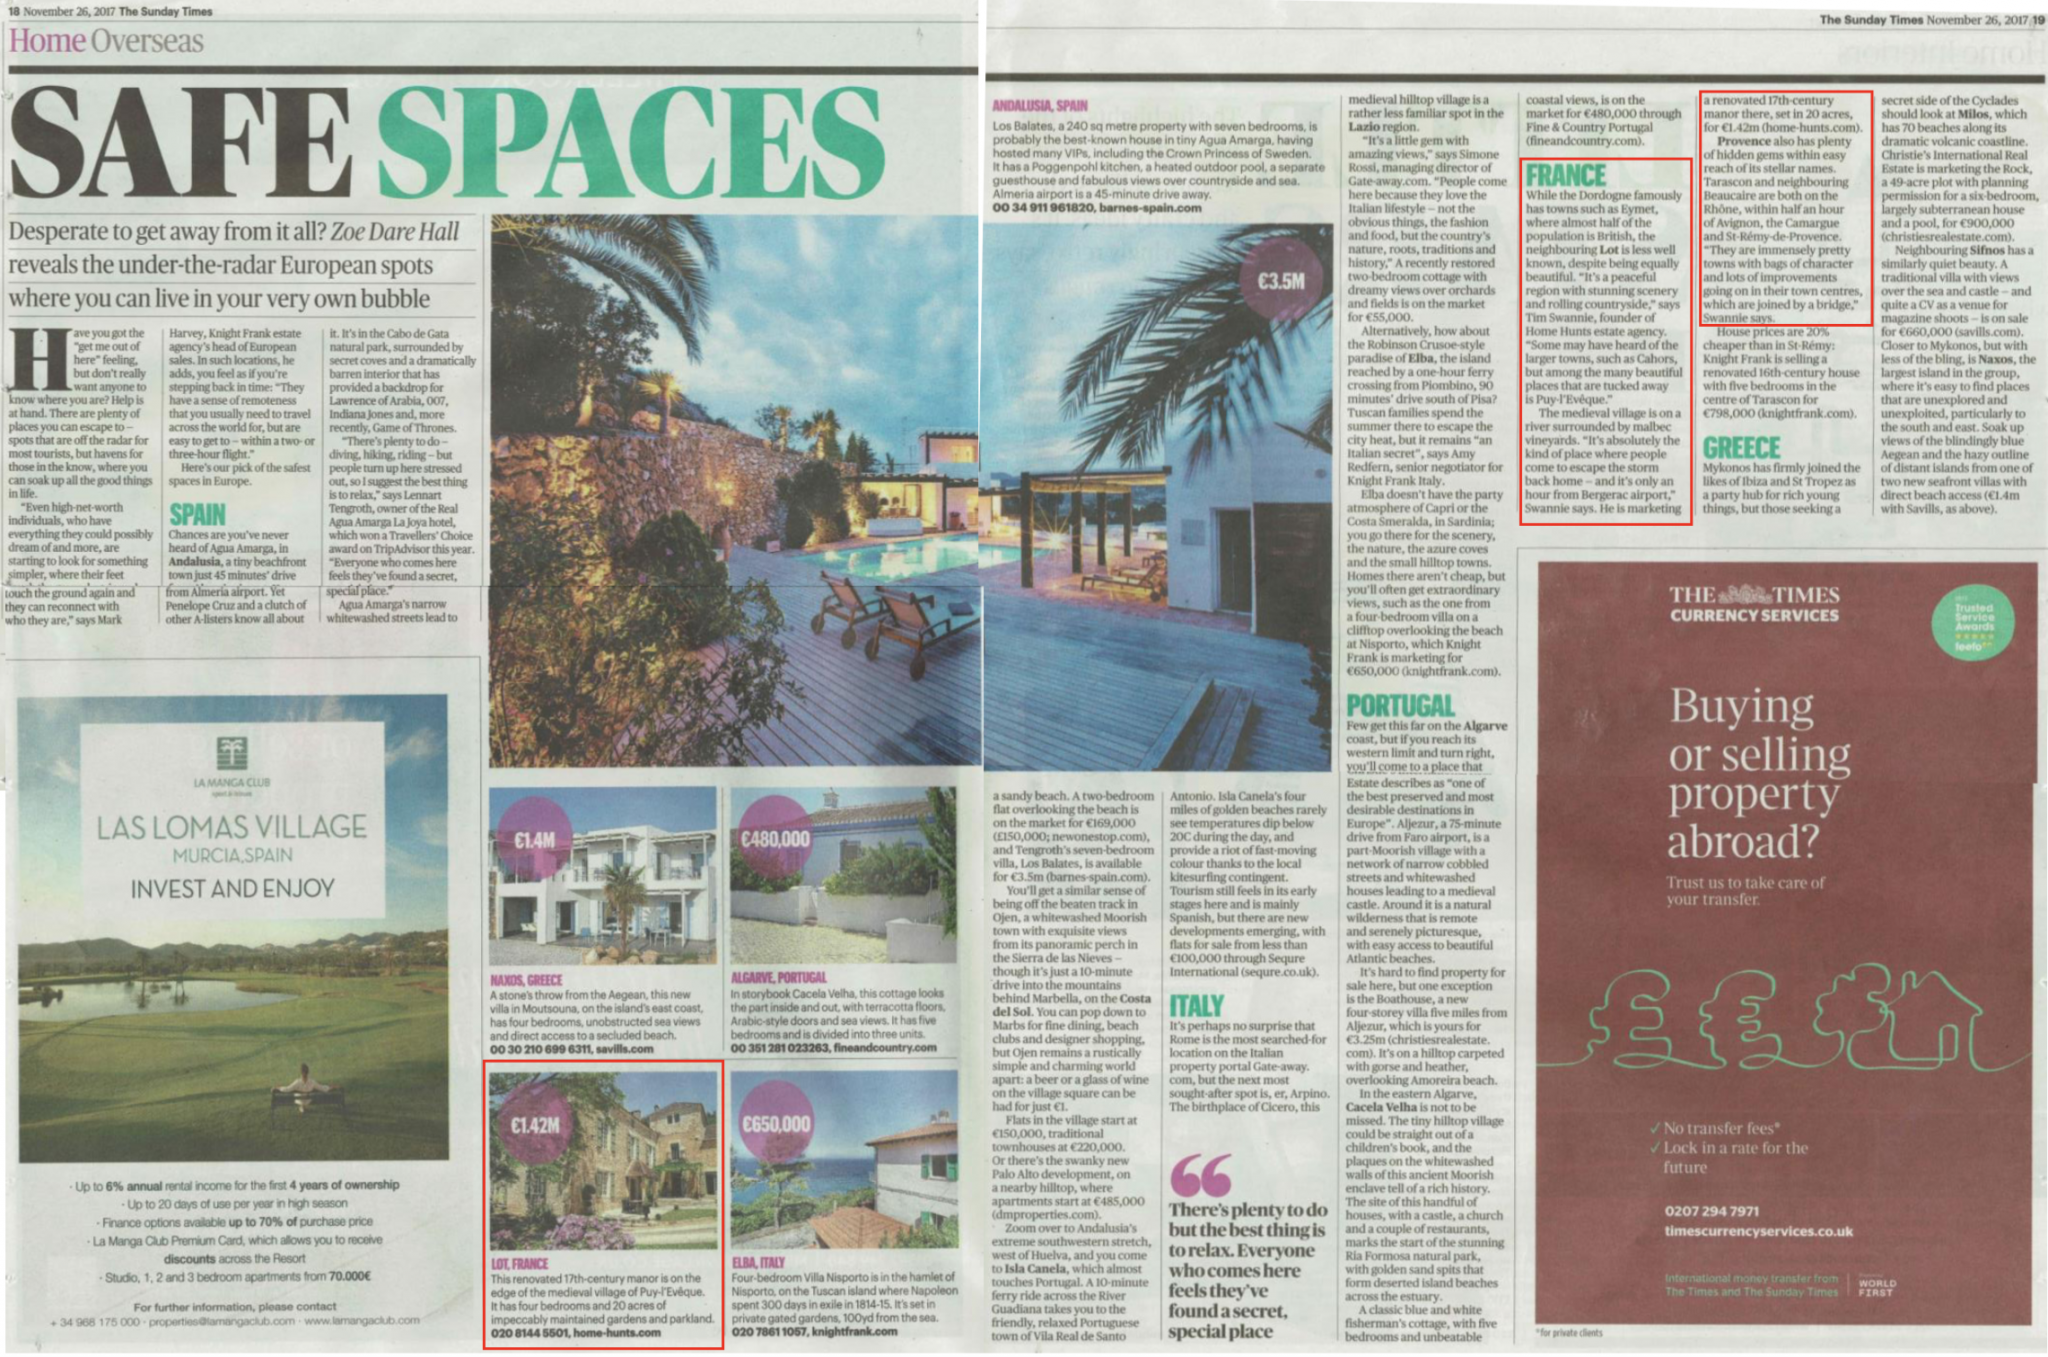 Sunday Times – Safest Spaces to buy property in Europe